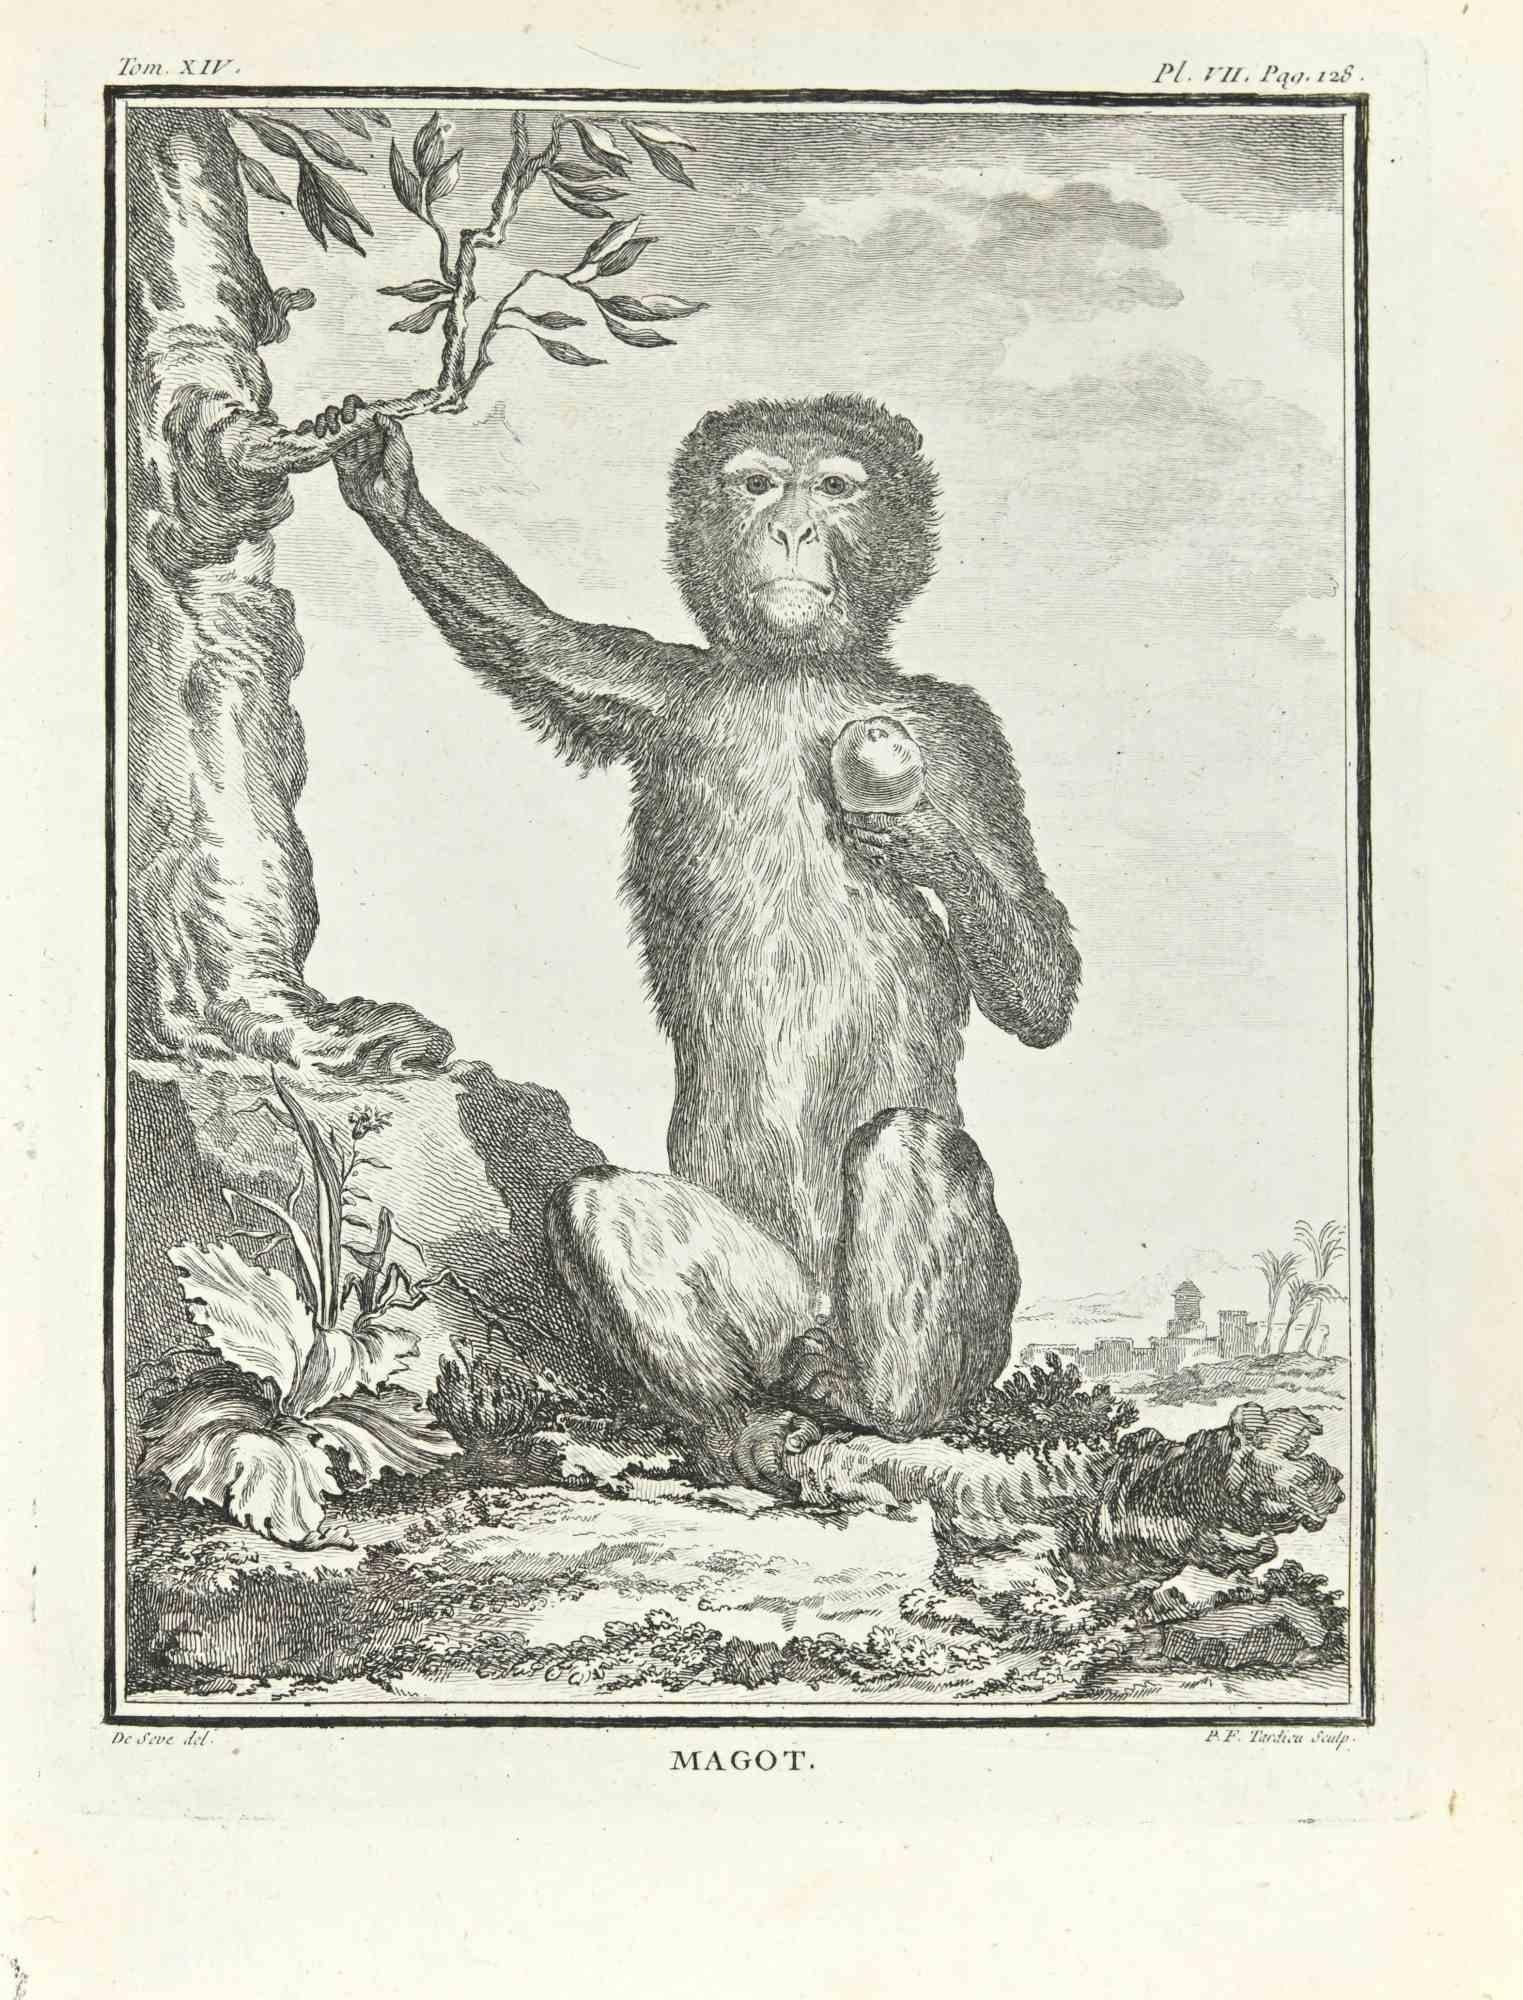 Magot is an etching realized by Pierre Francois Tardieu in 1771.

It belongs to the suite "Histoire Naturelle de Buffon".

The Artist's signature is engraved lower right.

Good conditions